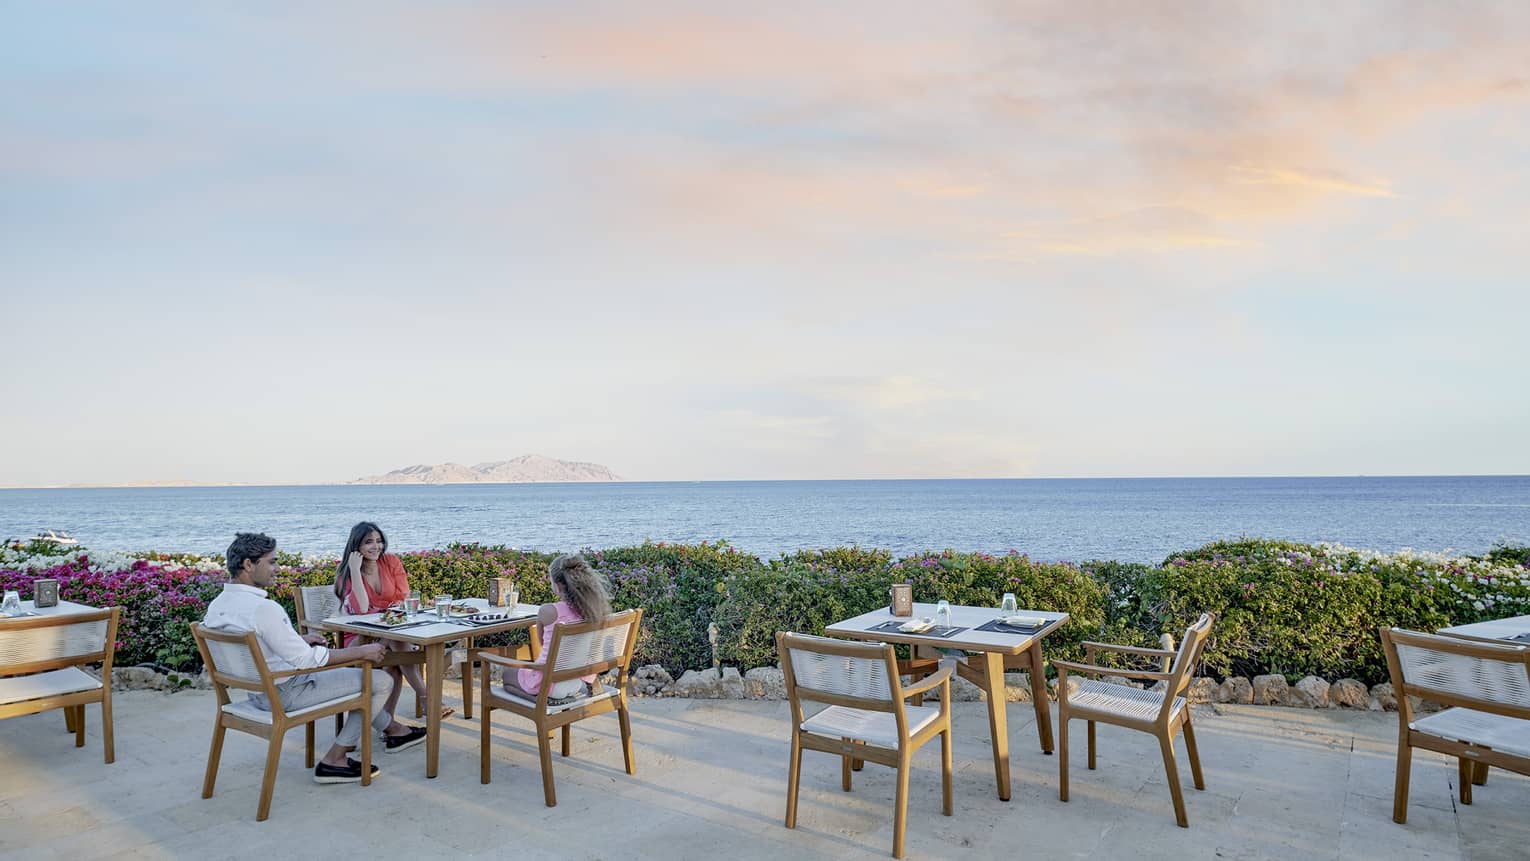 Man and woman sit at dining table on outdoor restaurant terrace, sea view